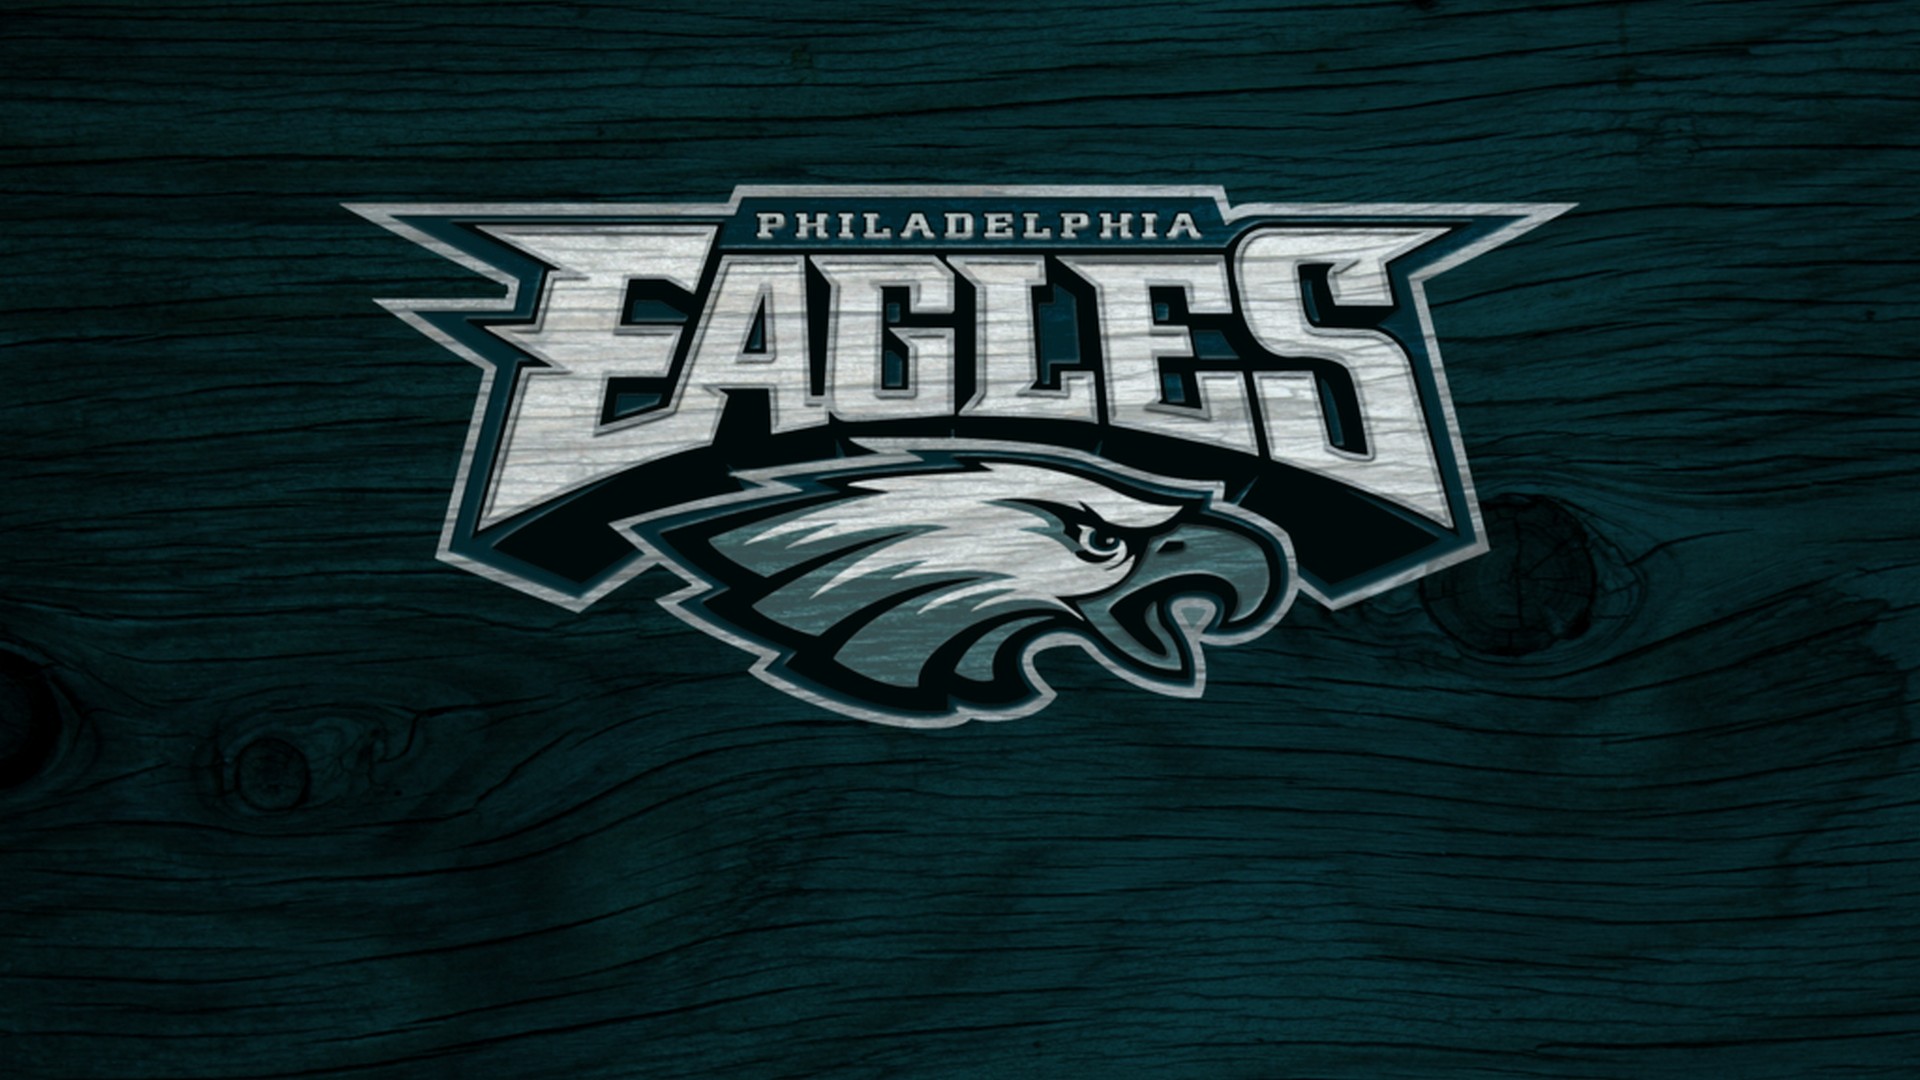 NFL Eagles For PC Wallpaper With Resolution 1920X1080 pixel. You can make this wallpaper for your Mac or Windows Desktop Background, iPhone, Android or Tablet and another Smartphone device for free